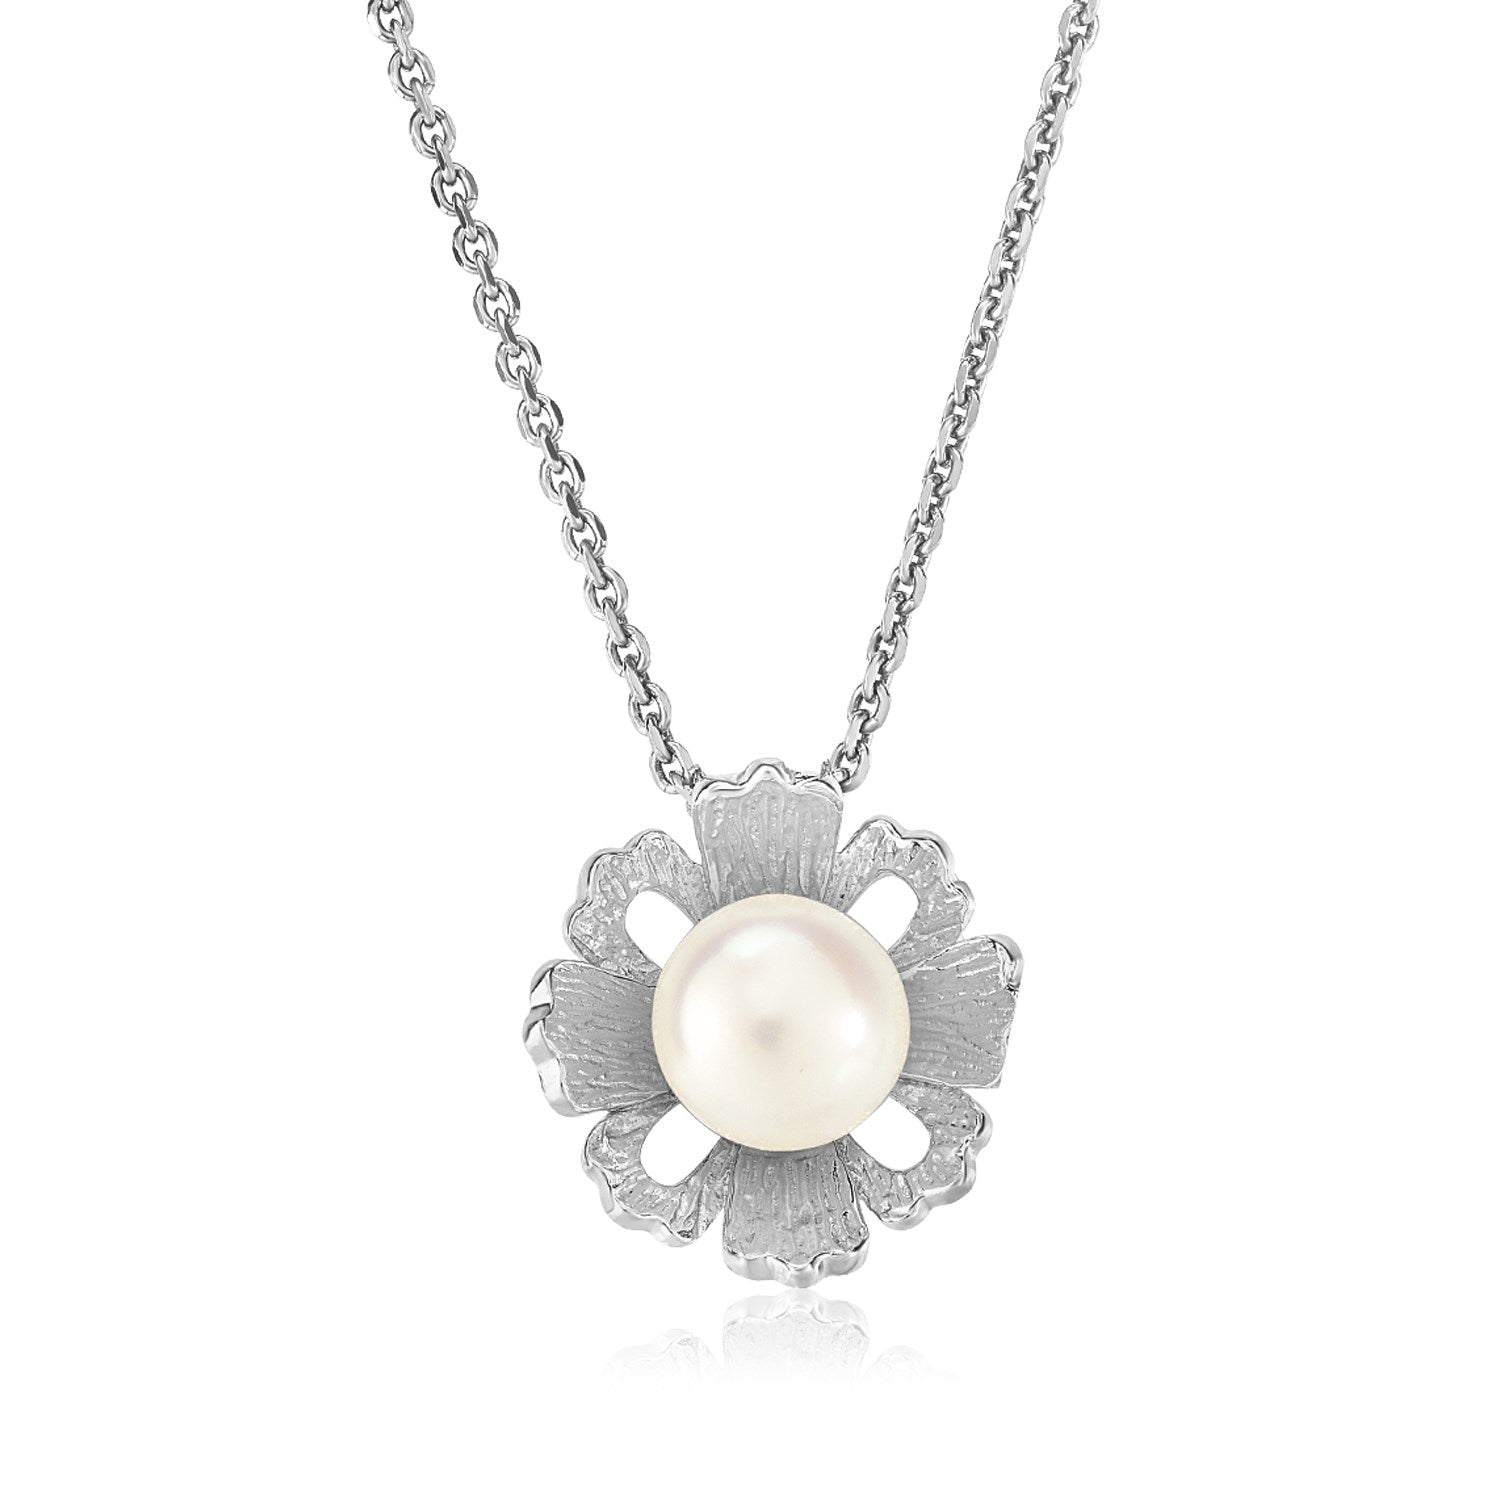 Sterling Silver Pendant with Flower Motif and Freshwater Pearl